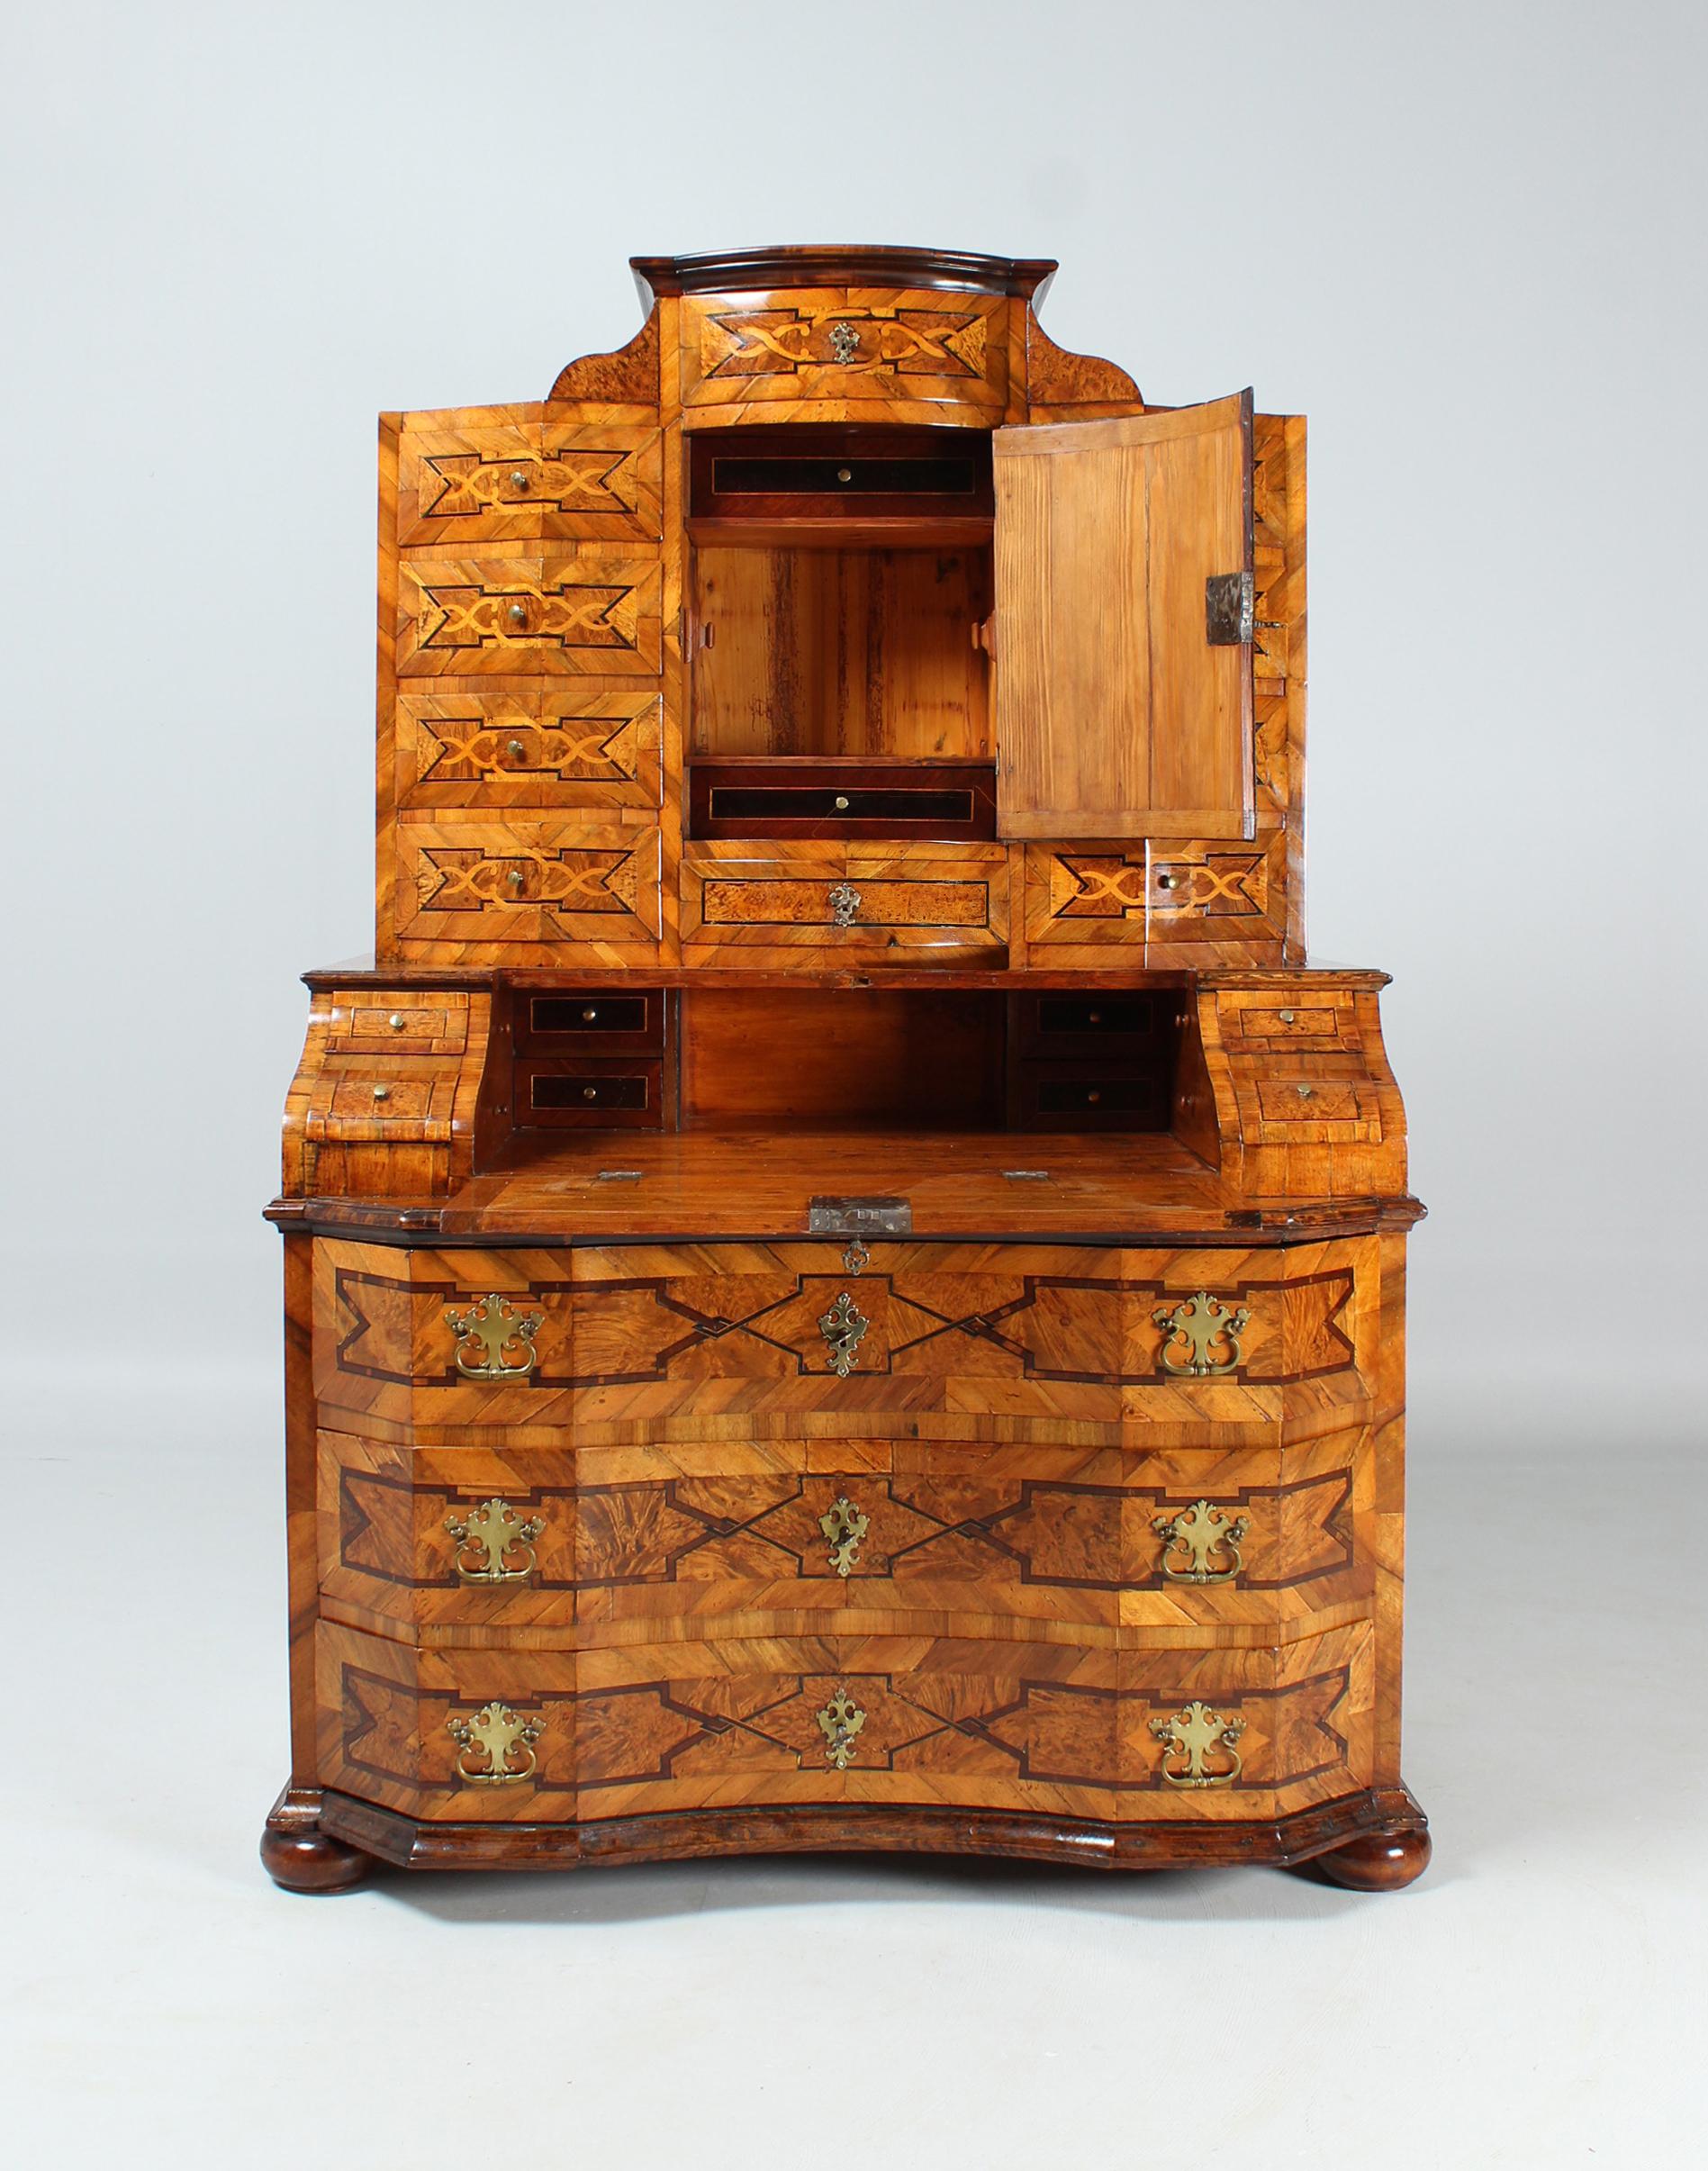 Baroque tabernacle secretary with figural marquetry

Austria
Walnut, plum, maple
Baroque around 1750

Dimensions: 192 x 133 x 75 cm

Description:
Magnificent and exceptionally beautifully designed tabernacle secretary from the Austrian Baroque.

The